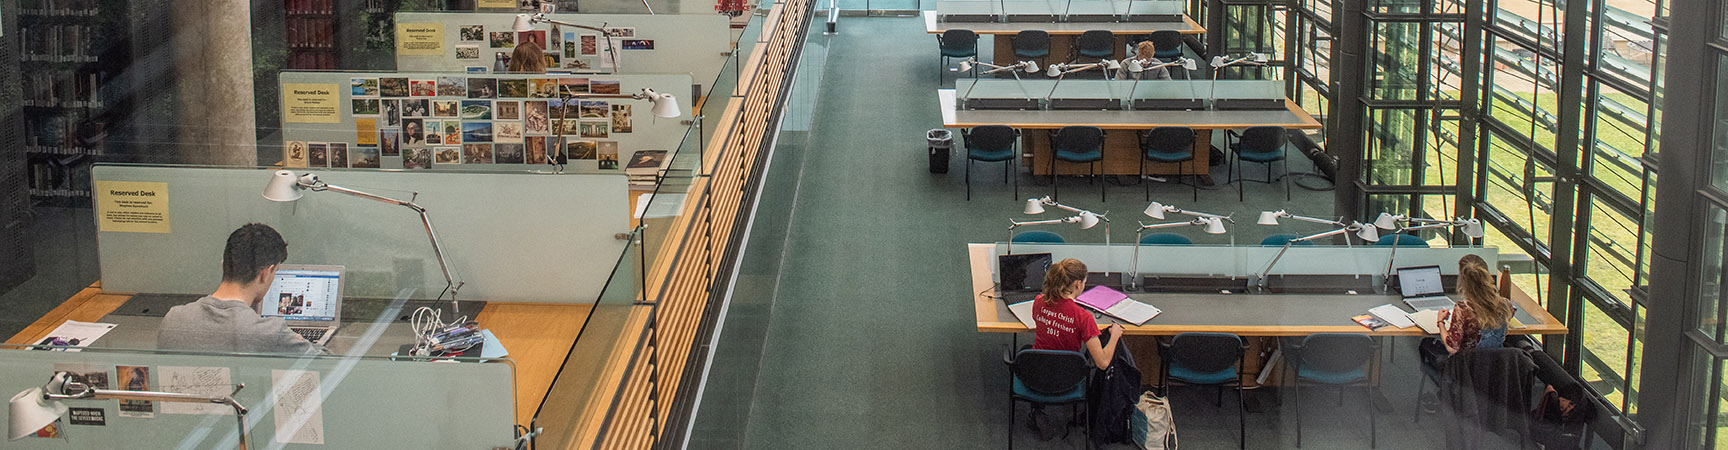 A birdseye view of the reading room at the Vere Harmsworth Library